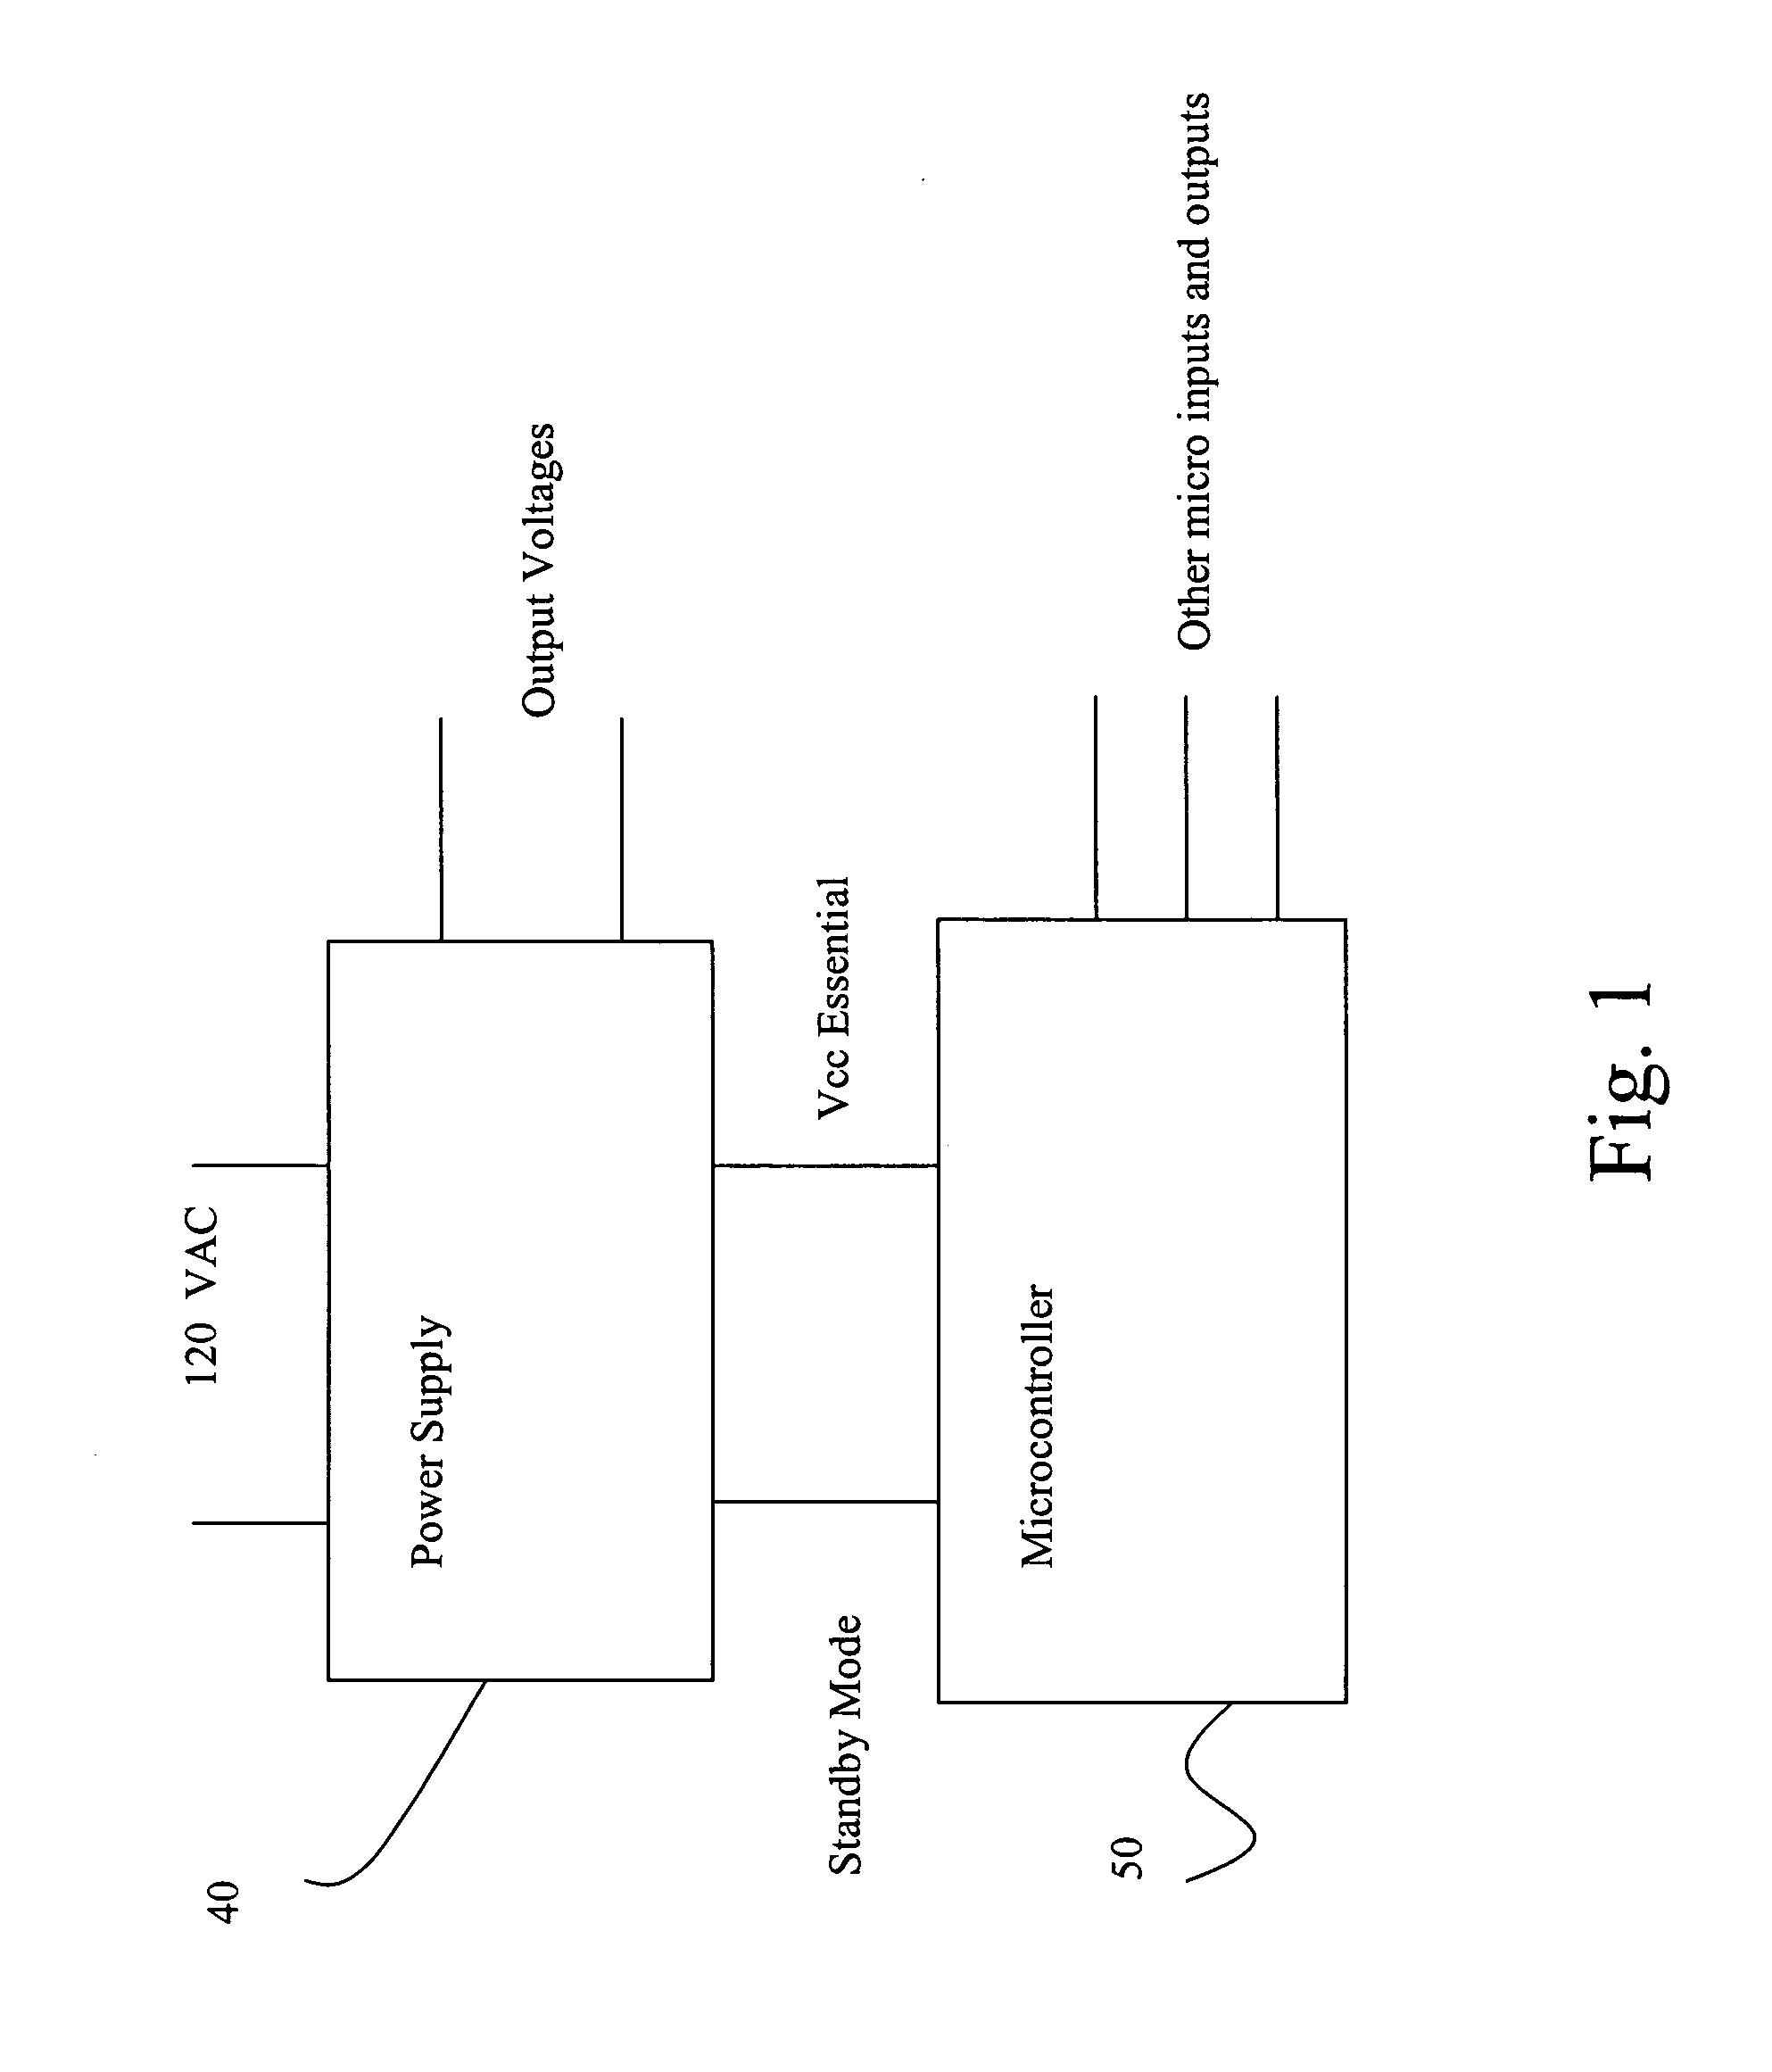 Systems and methods for achieving low power standby through interaction between a microcontroller and a switching mode power supply